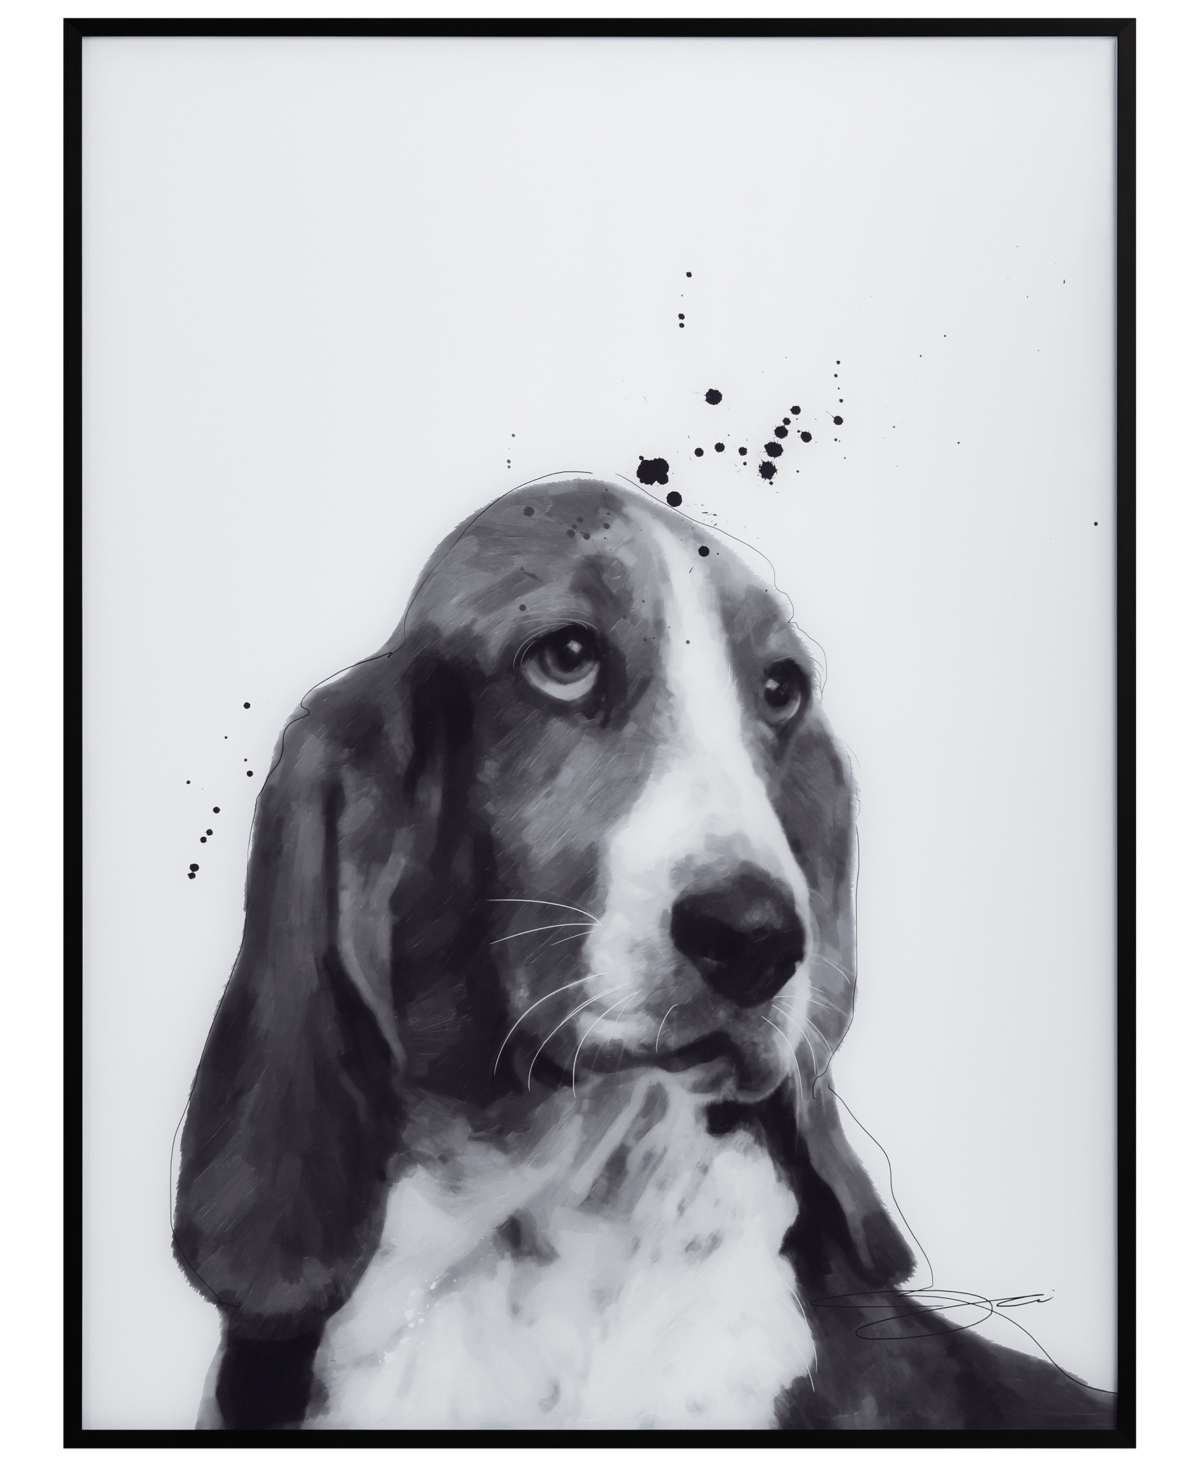 Empire Art Direct "basset Hound" Pet Paintings On Printed Glass Encased With A Black Anodized Frame, 24" X 18" X 1" In Black And White